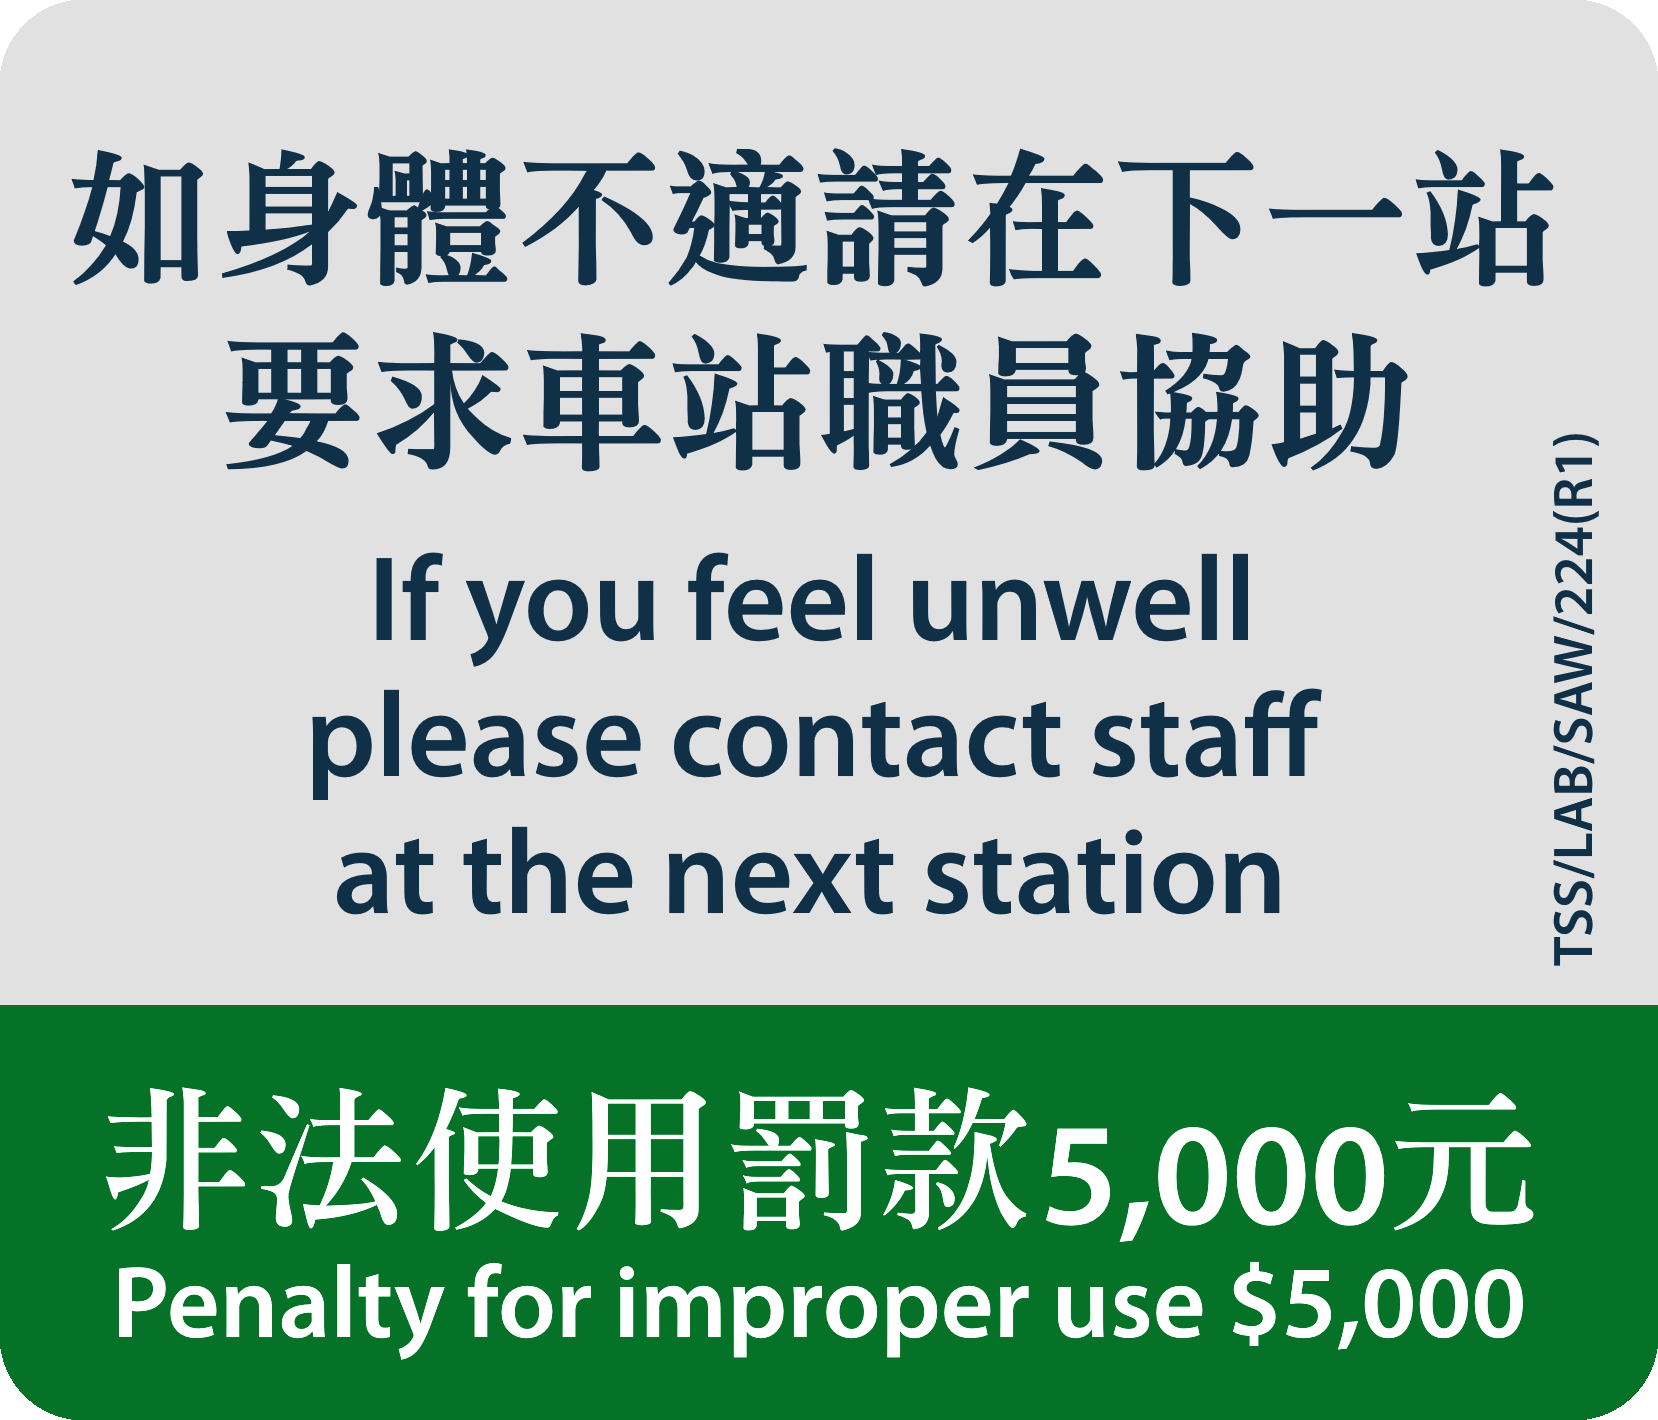 MTR sticker: Contact staff if you feel unwell